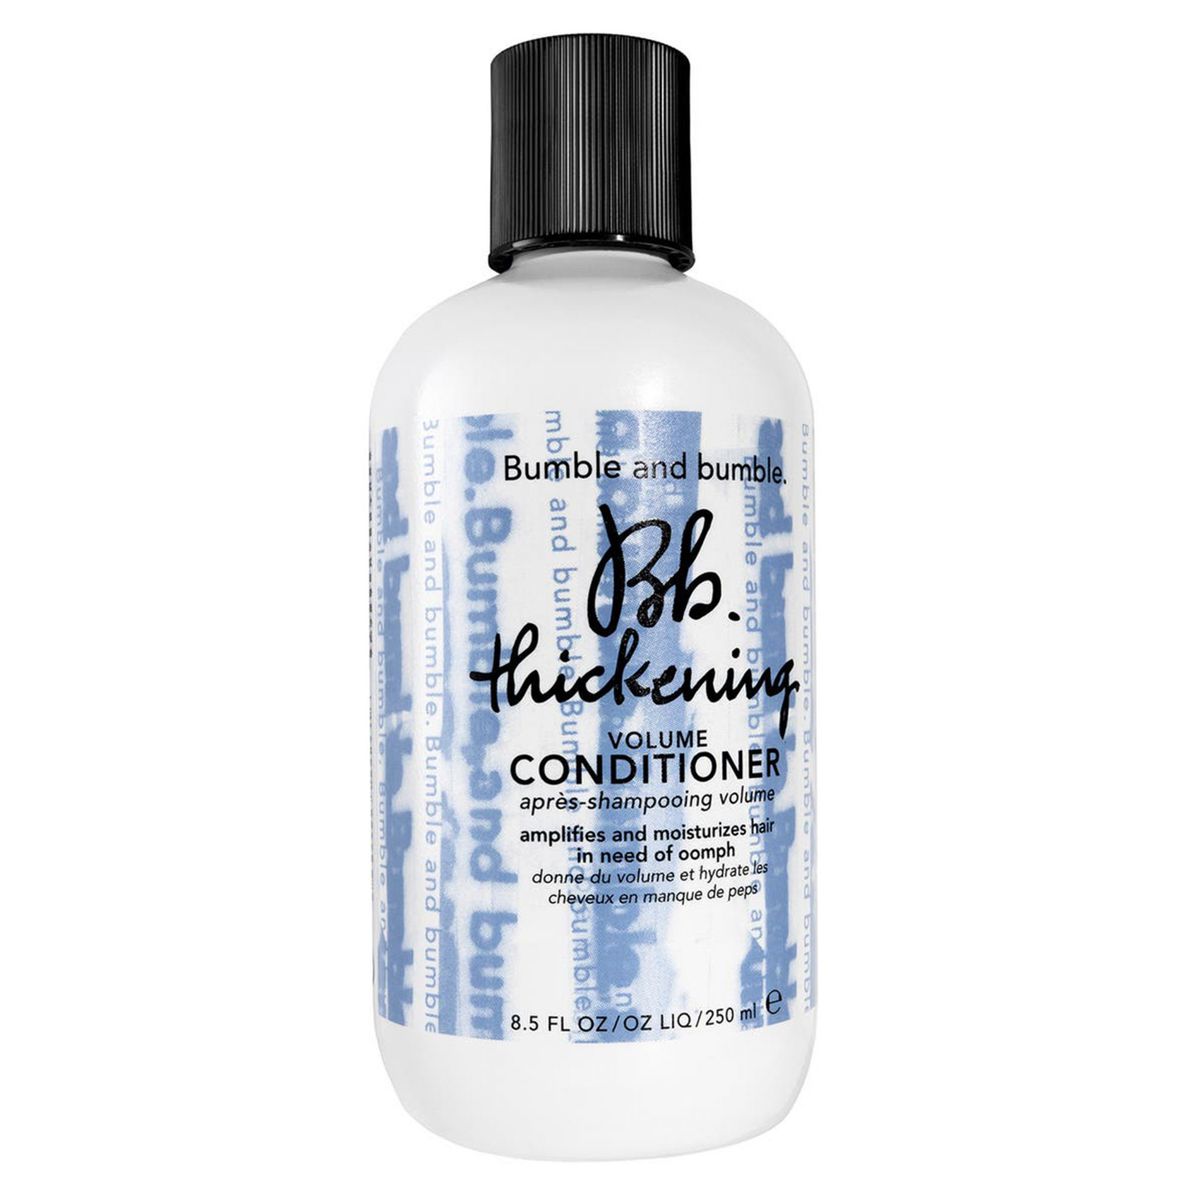 Bumble-Bumble-Thickening-Conditioner-Product